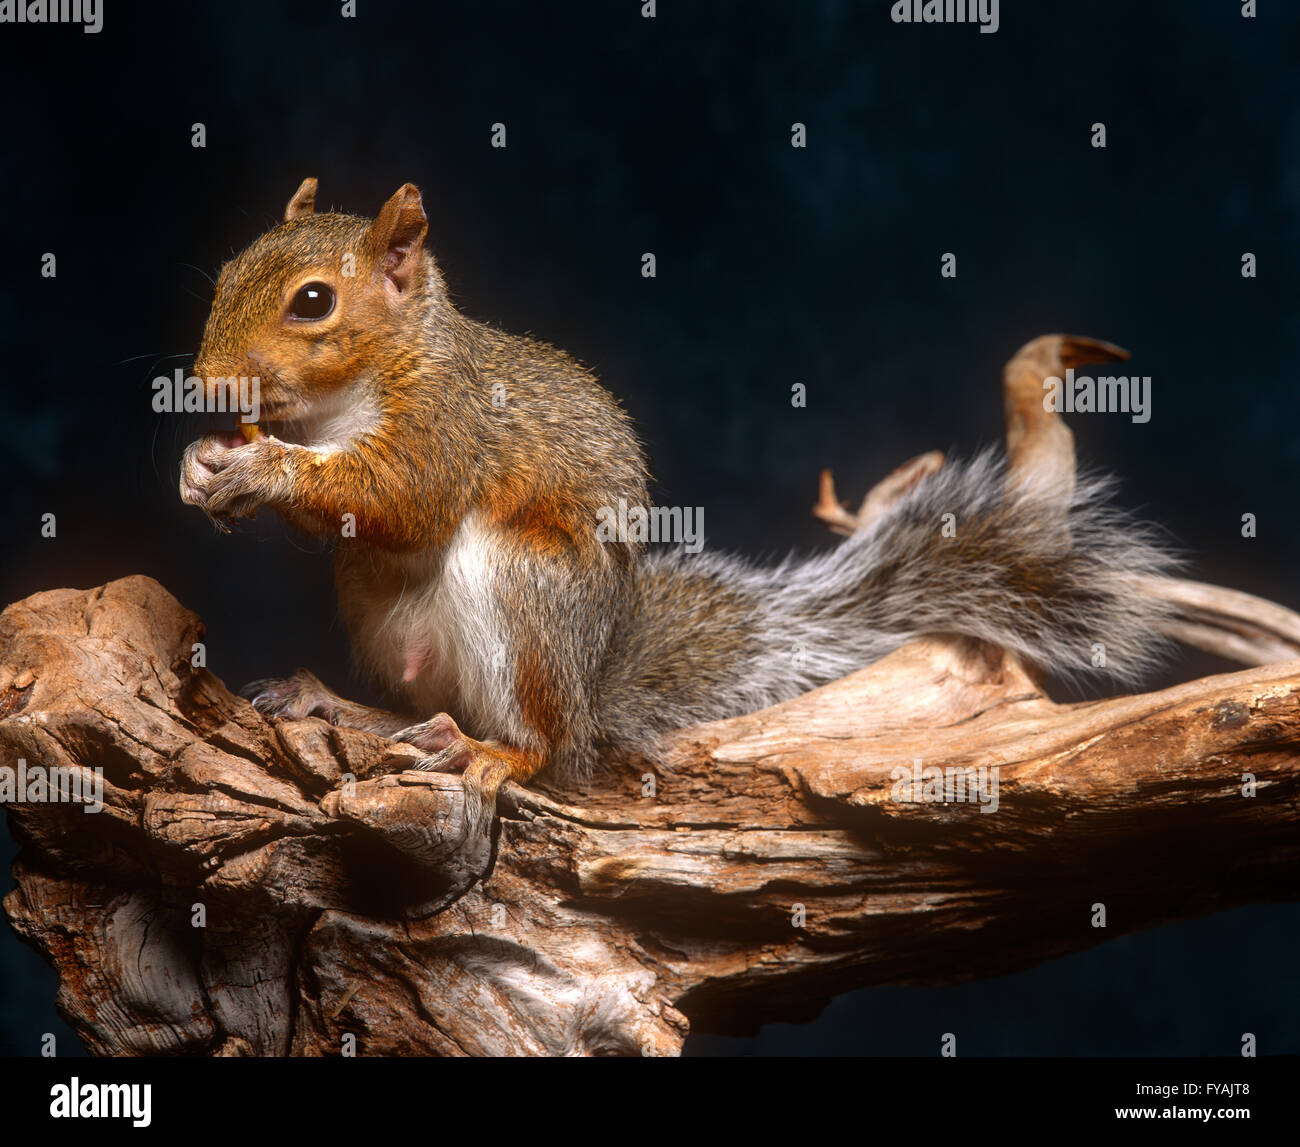 Squirrel sitting on a branch, inside. Stock Photo